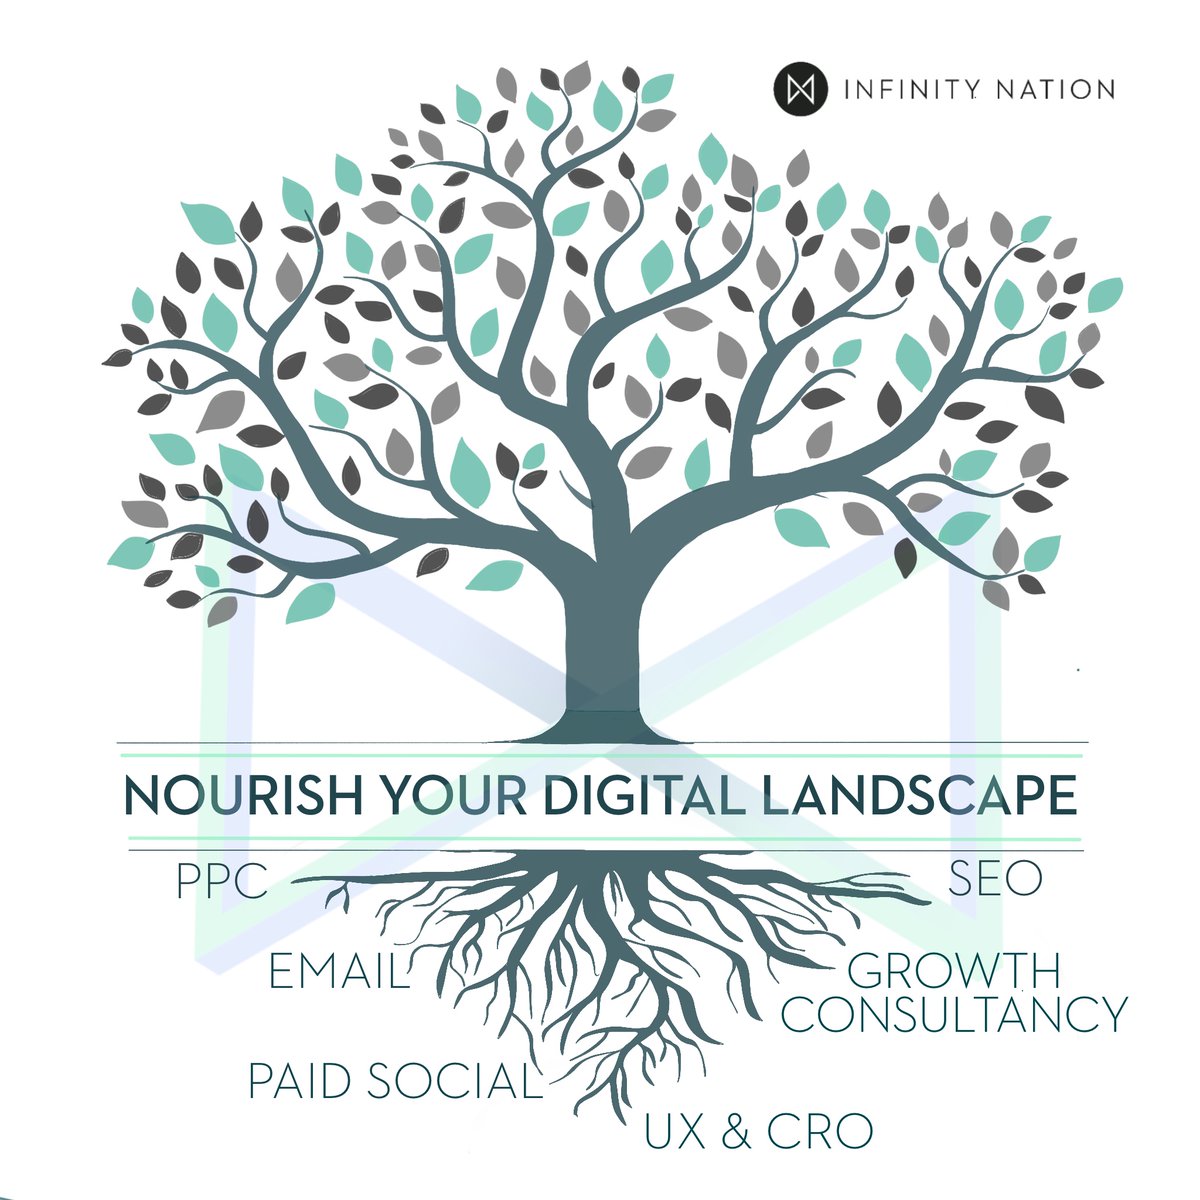 Are you nourishing your digital landscape?

There are many facets to align to nurture your platforms. Our award-winning team are here to help you to realise your growth aspirations.

Reach out today to speak to one of our team.

#digitalnourishment #growyourroots #growthpartner